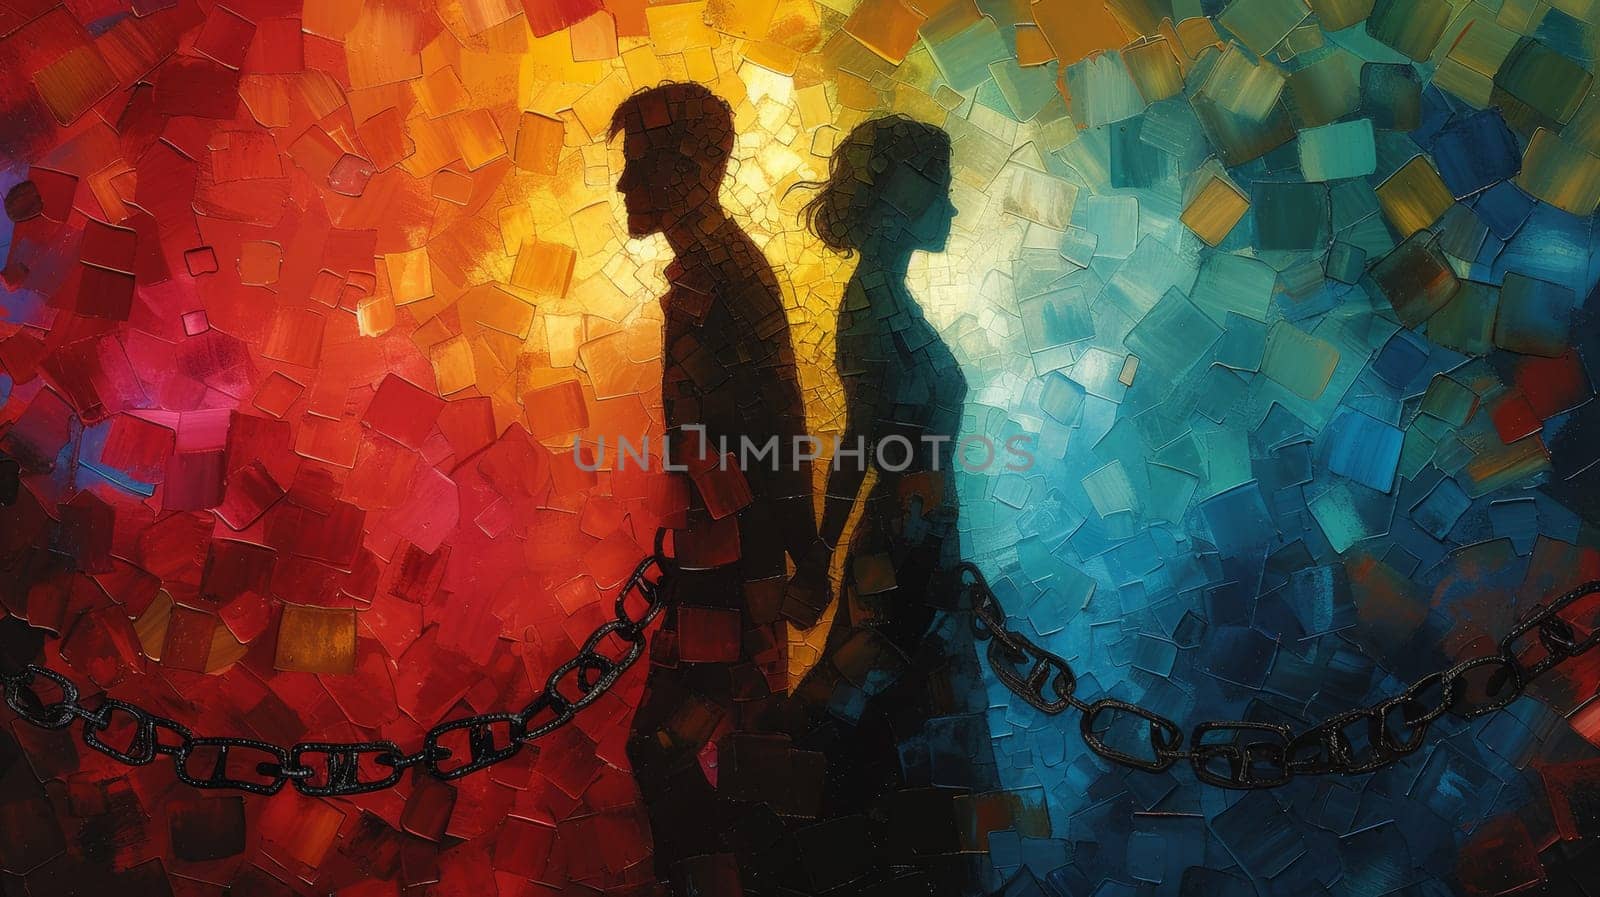 A couple is chained together in a mosaic painting